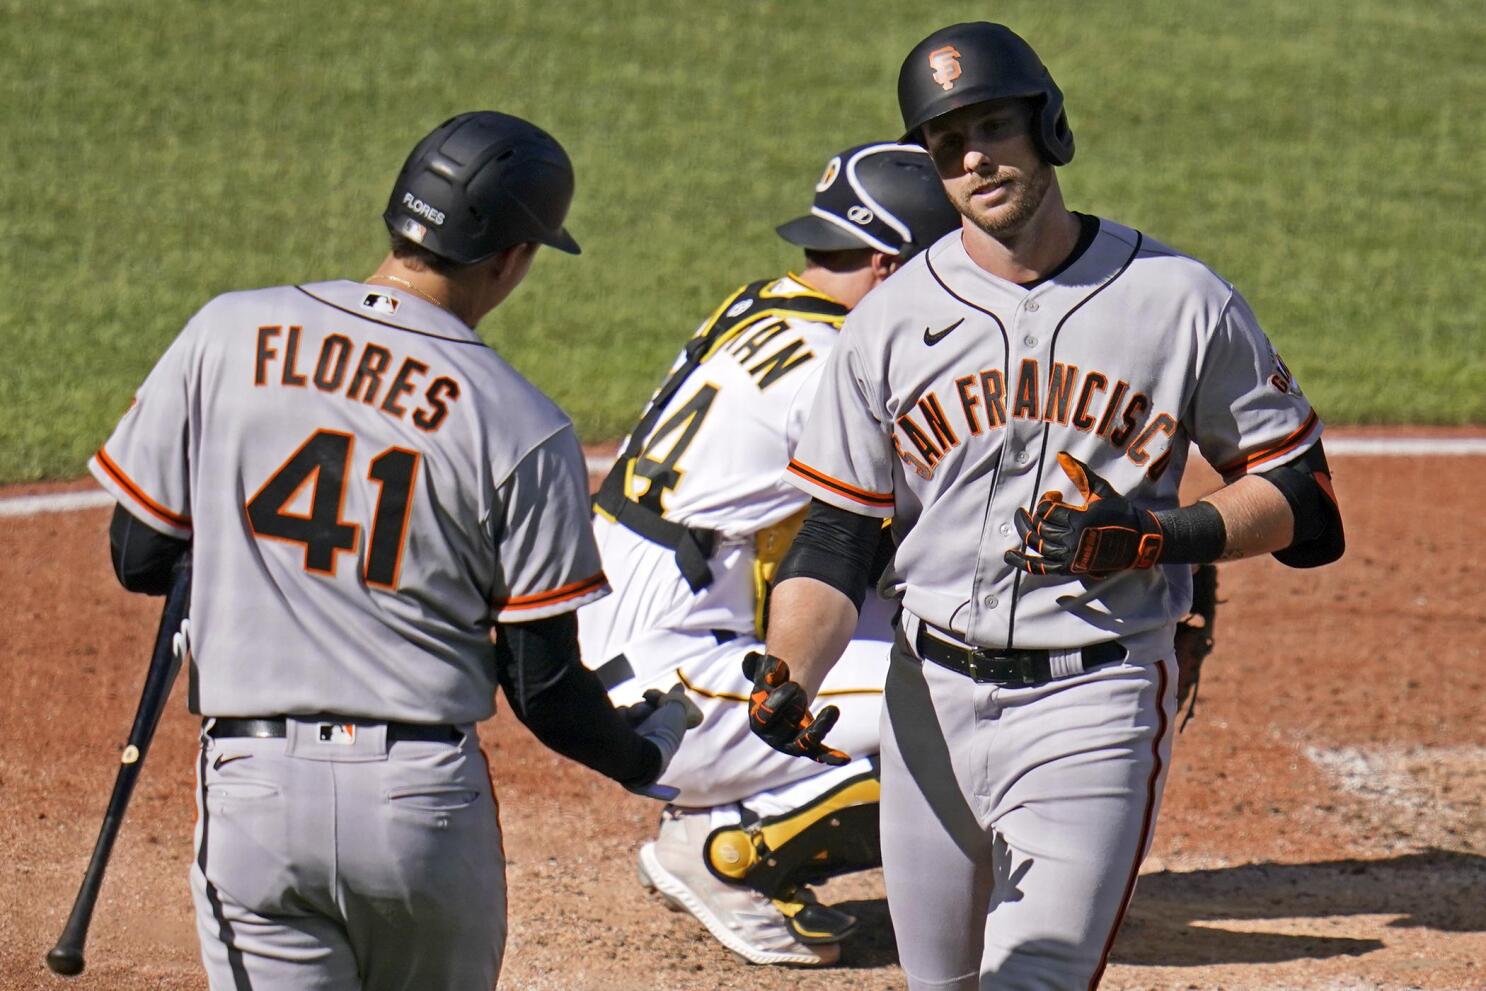 Crawford's slam sets tone as Giants top Pirates 8-0